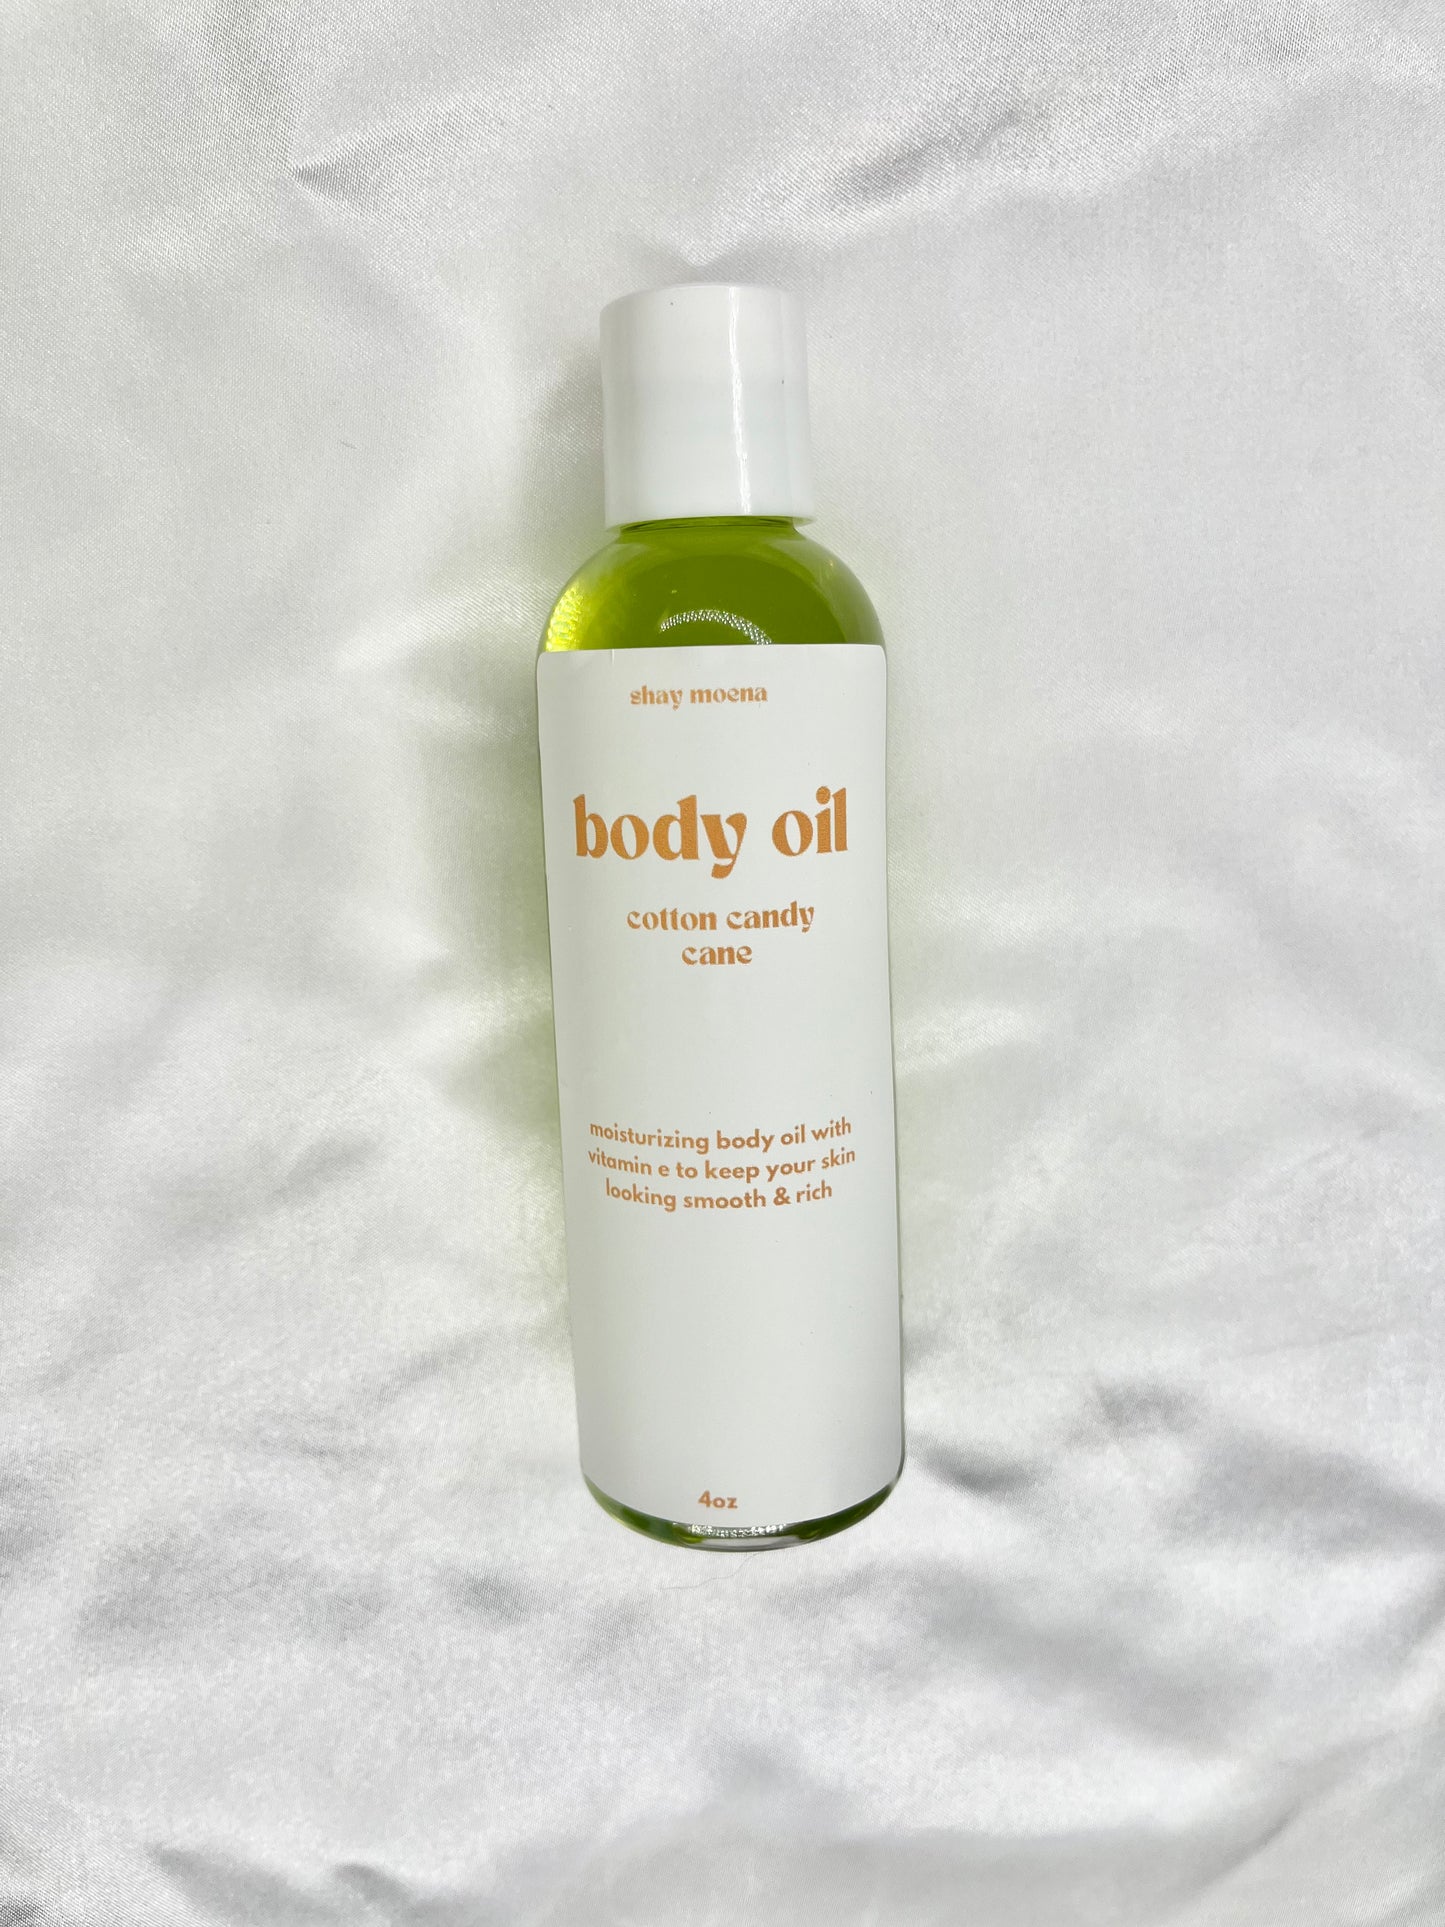 cotton candy cane body oil